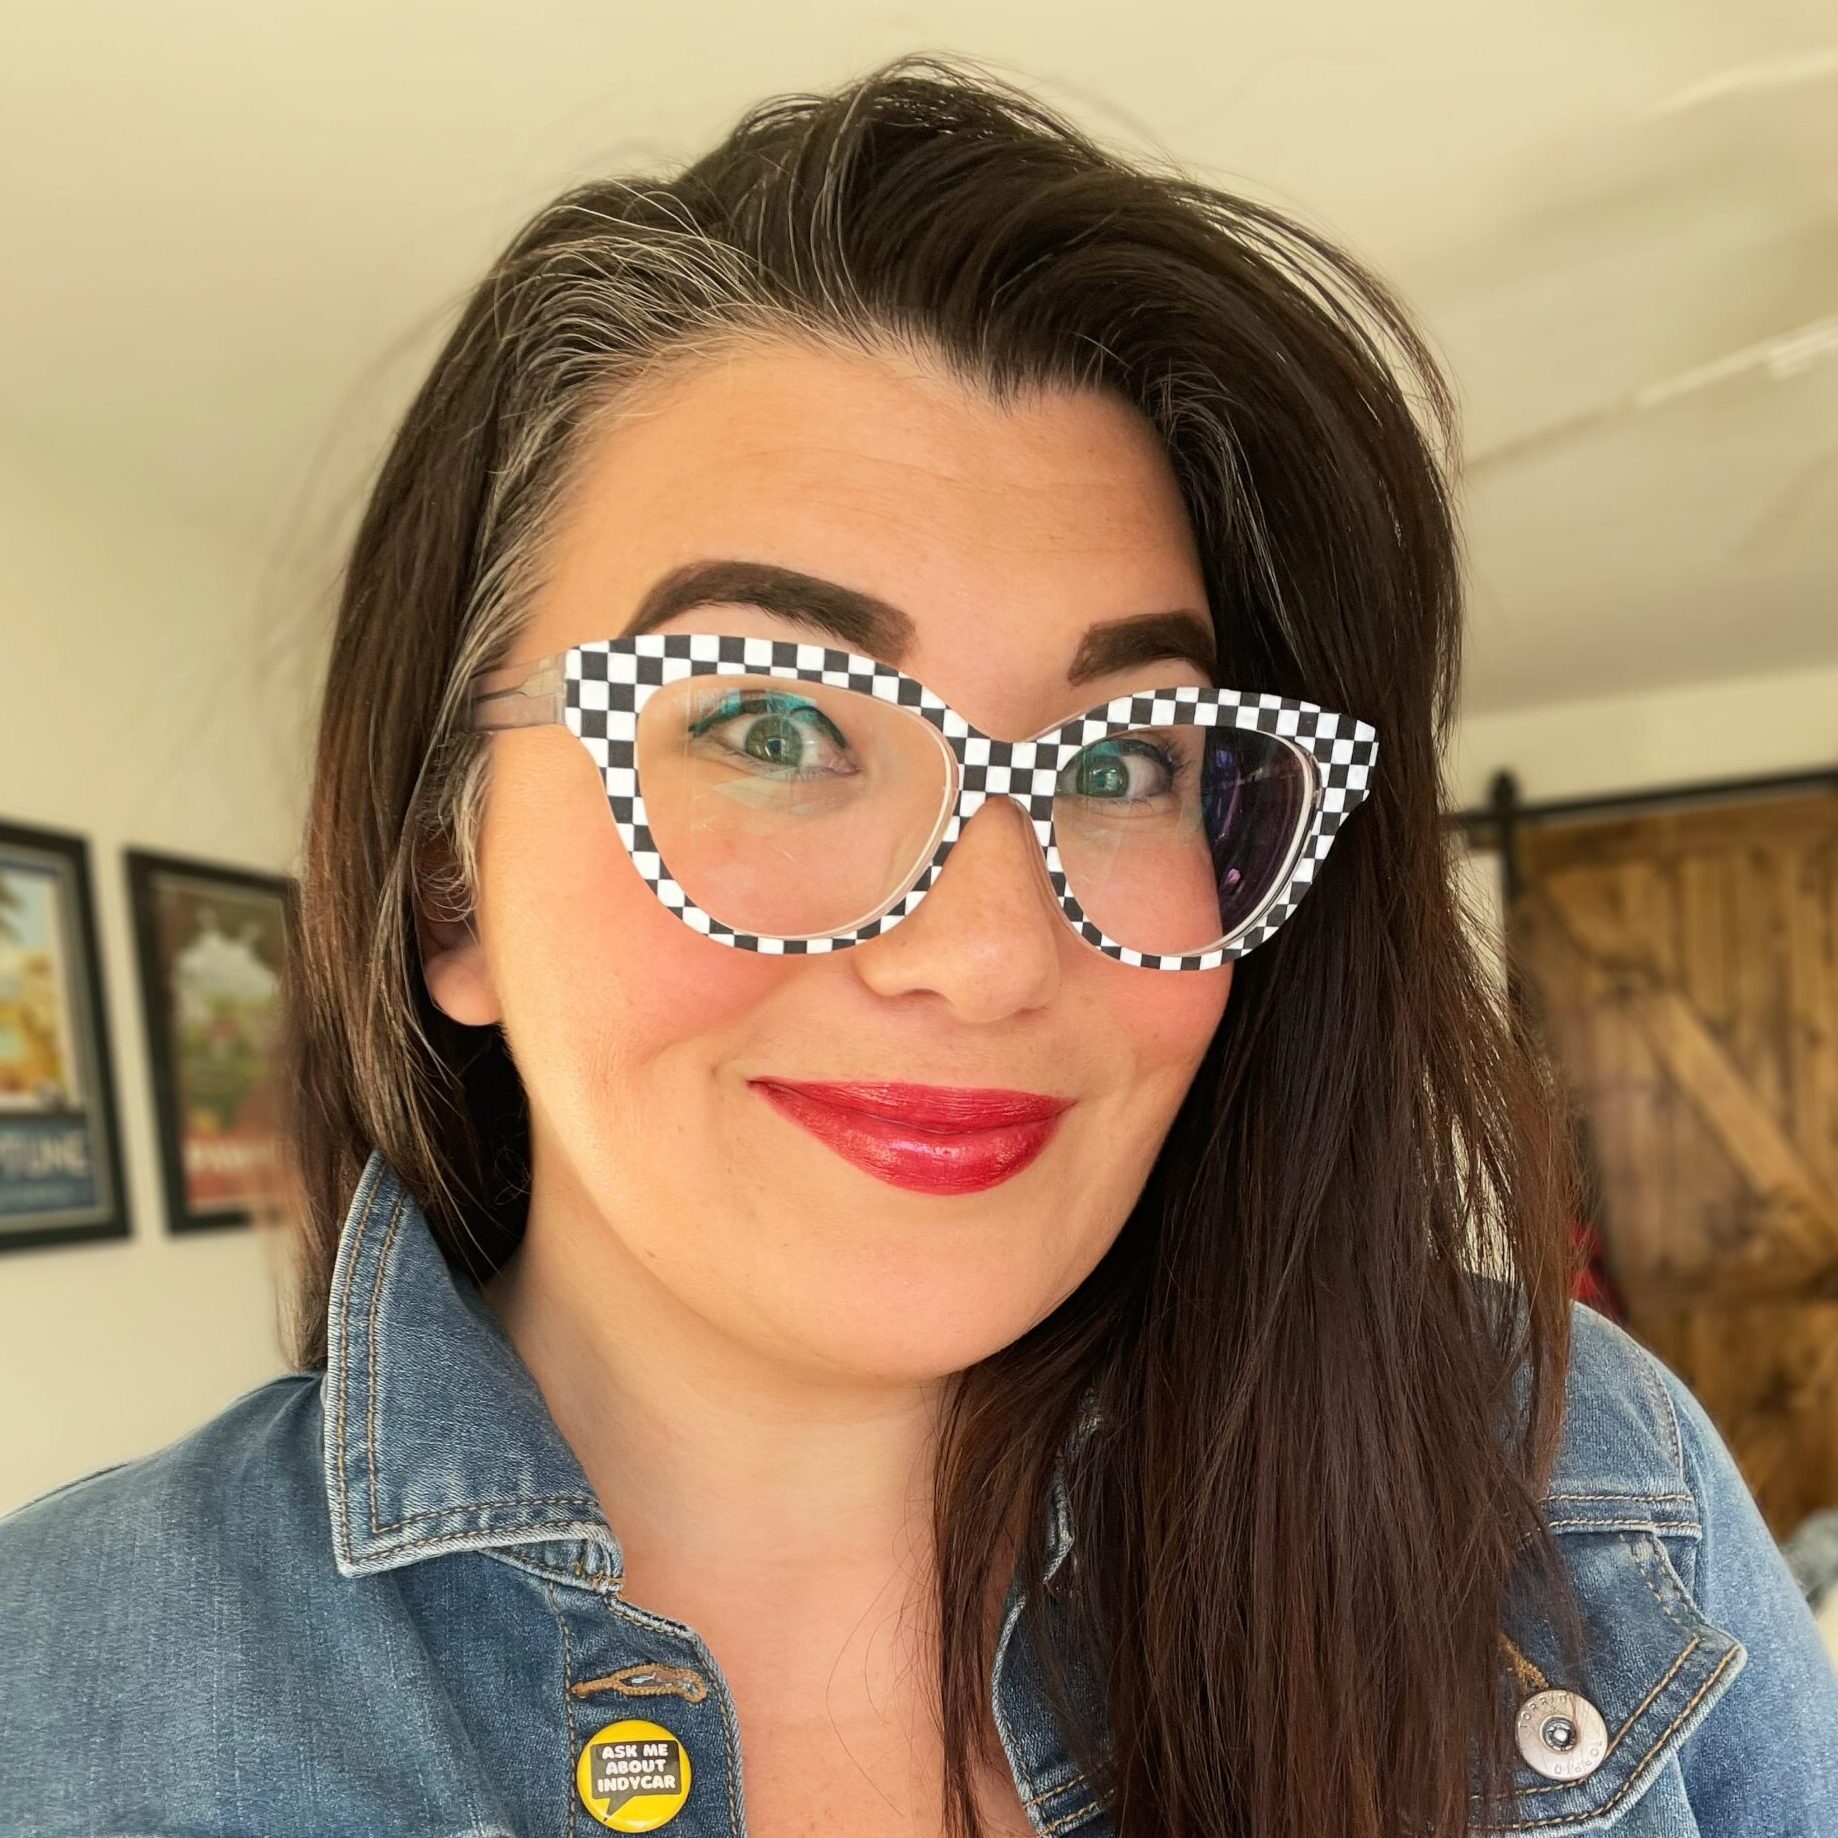 Cassie smiles to the camera while wearing checkerboard glasses and a denim jacket.